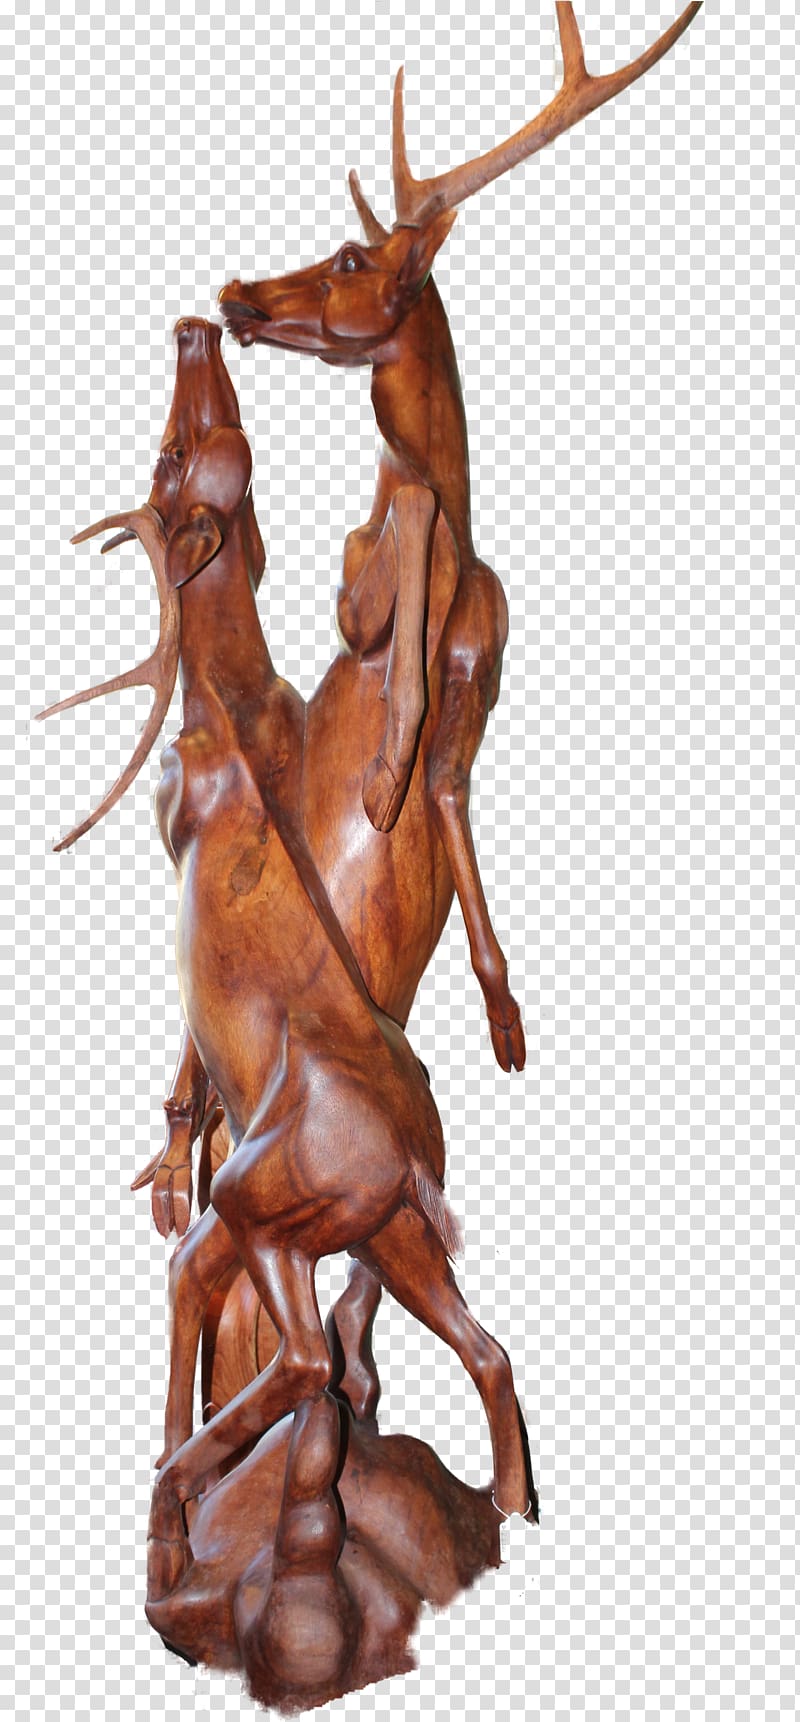 Wood carving Sculpture, woodcarving transparent background PNG clipart